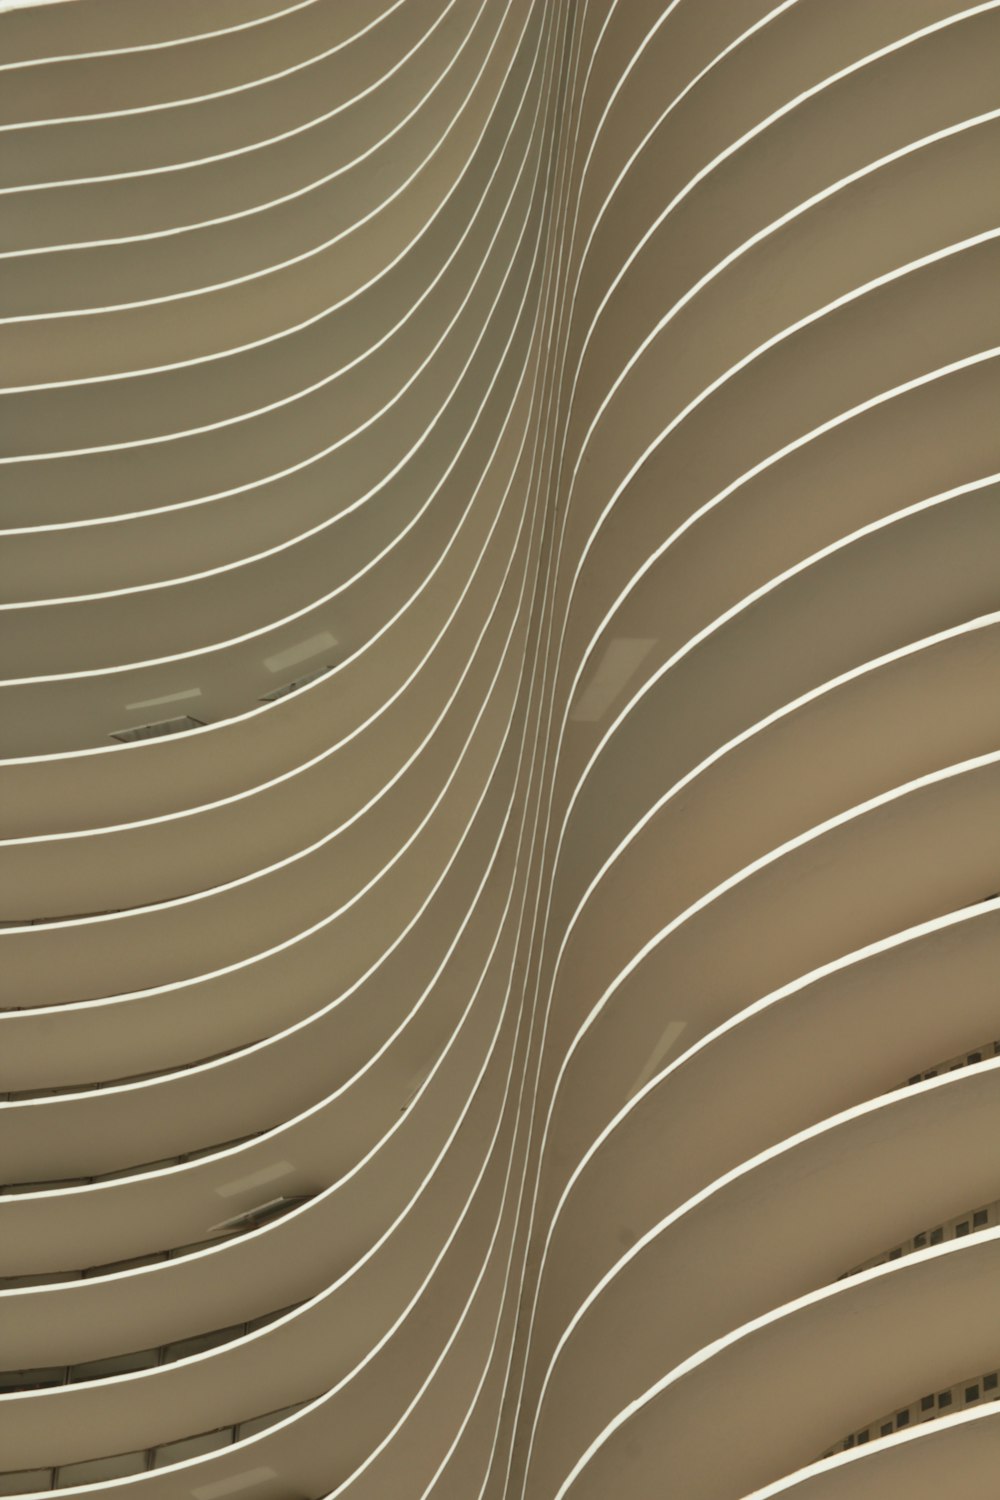 a close up of a building made of wavy lines